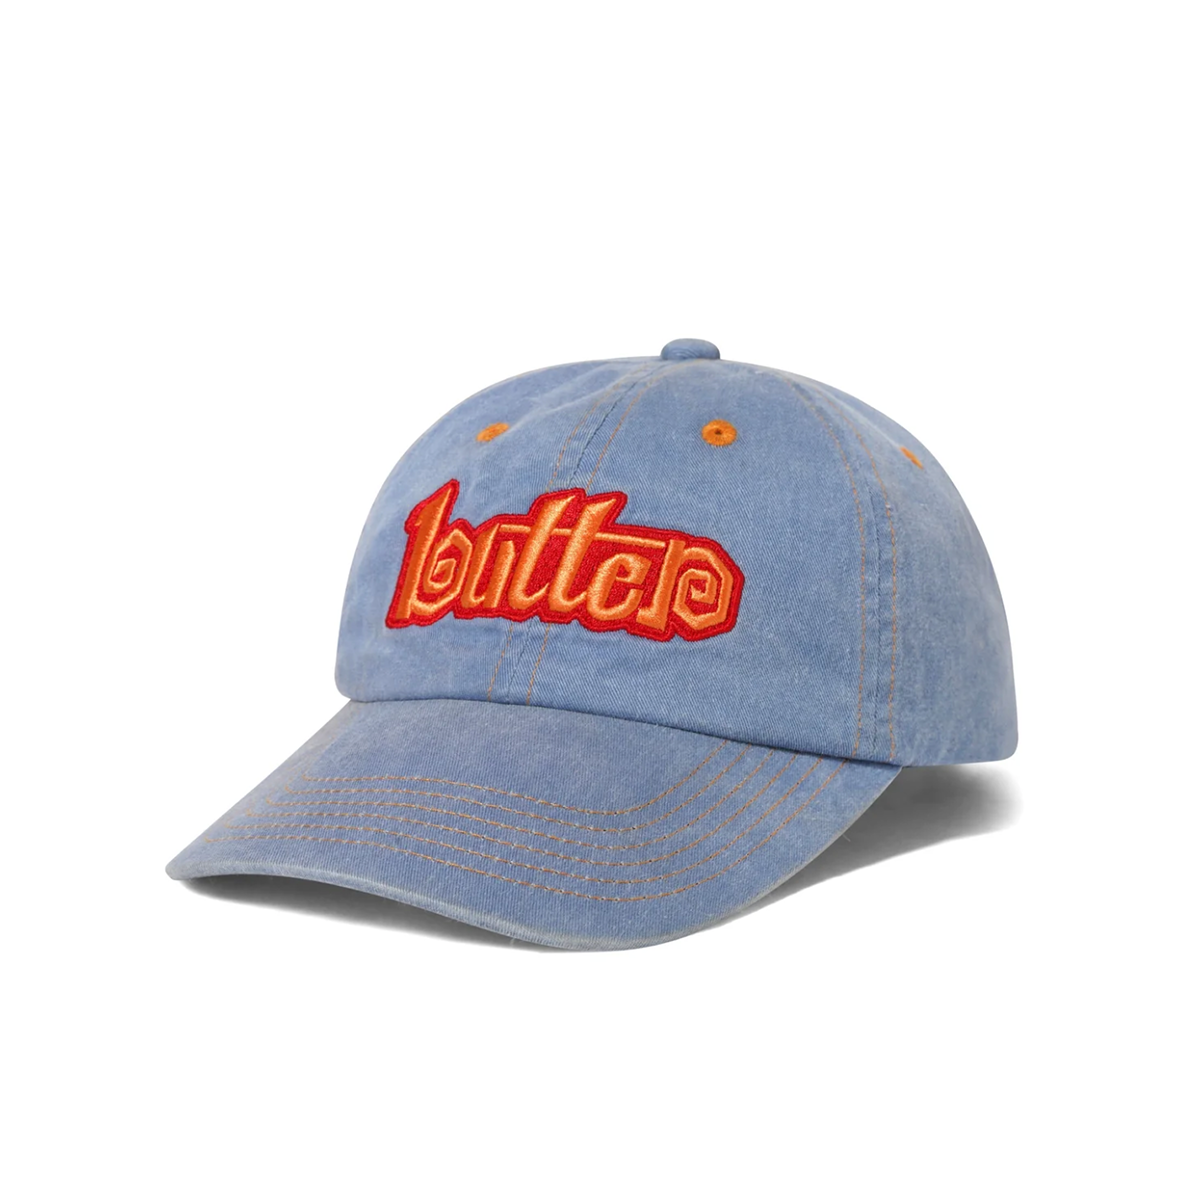 Butter Swirl 6 Panel Hat - Assorted Colors